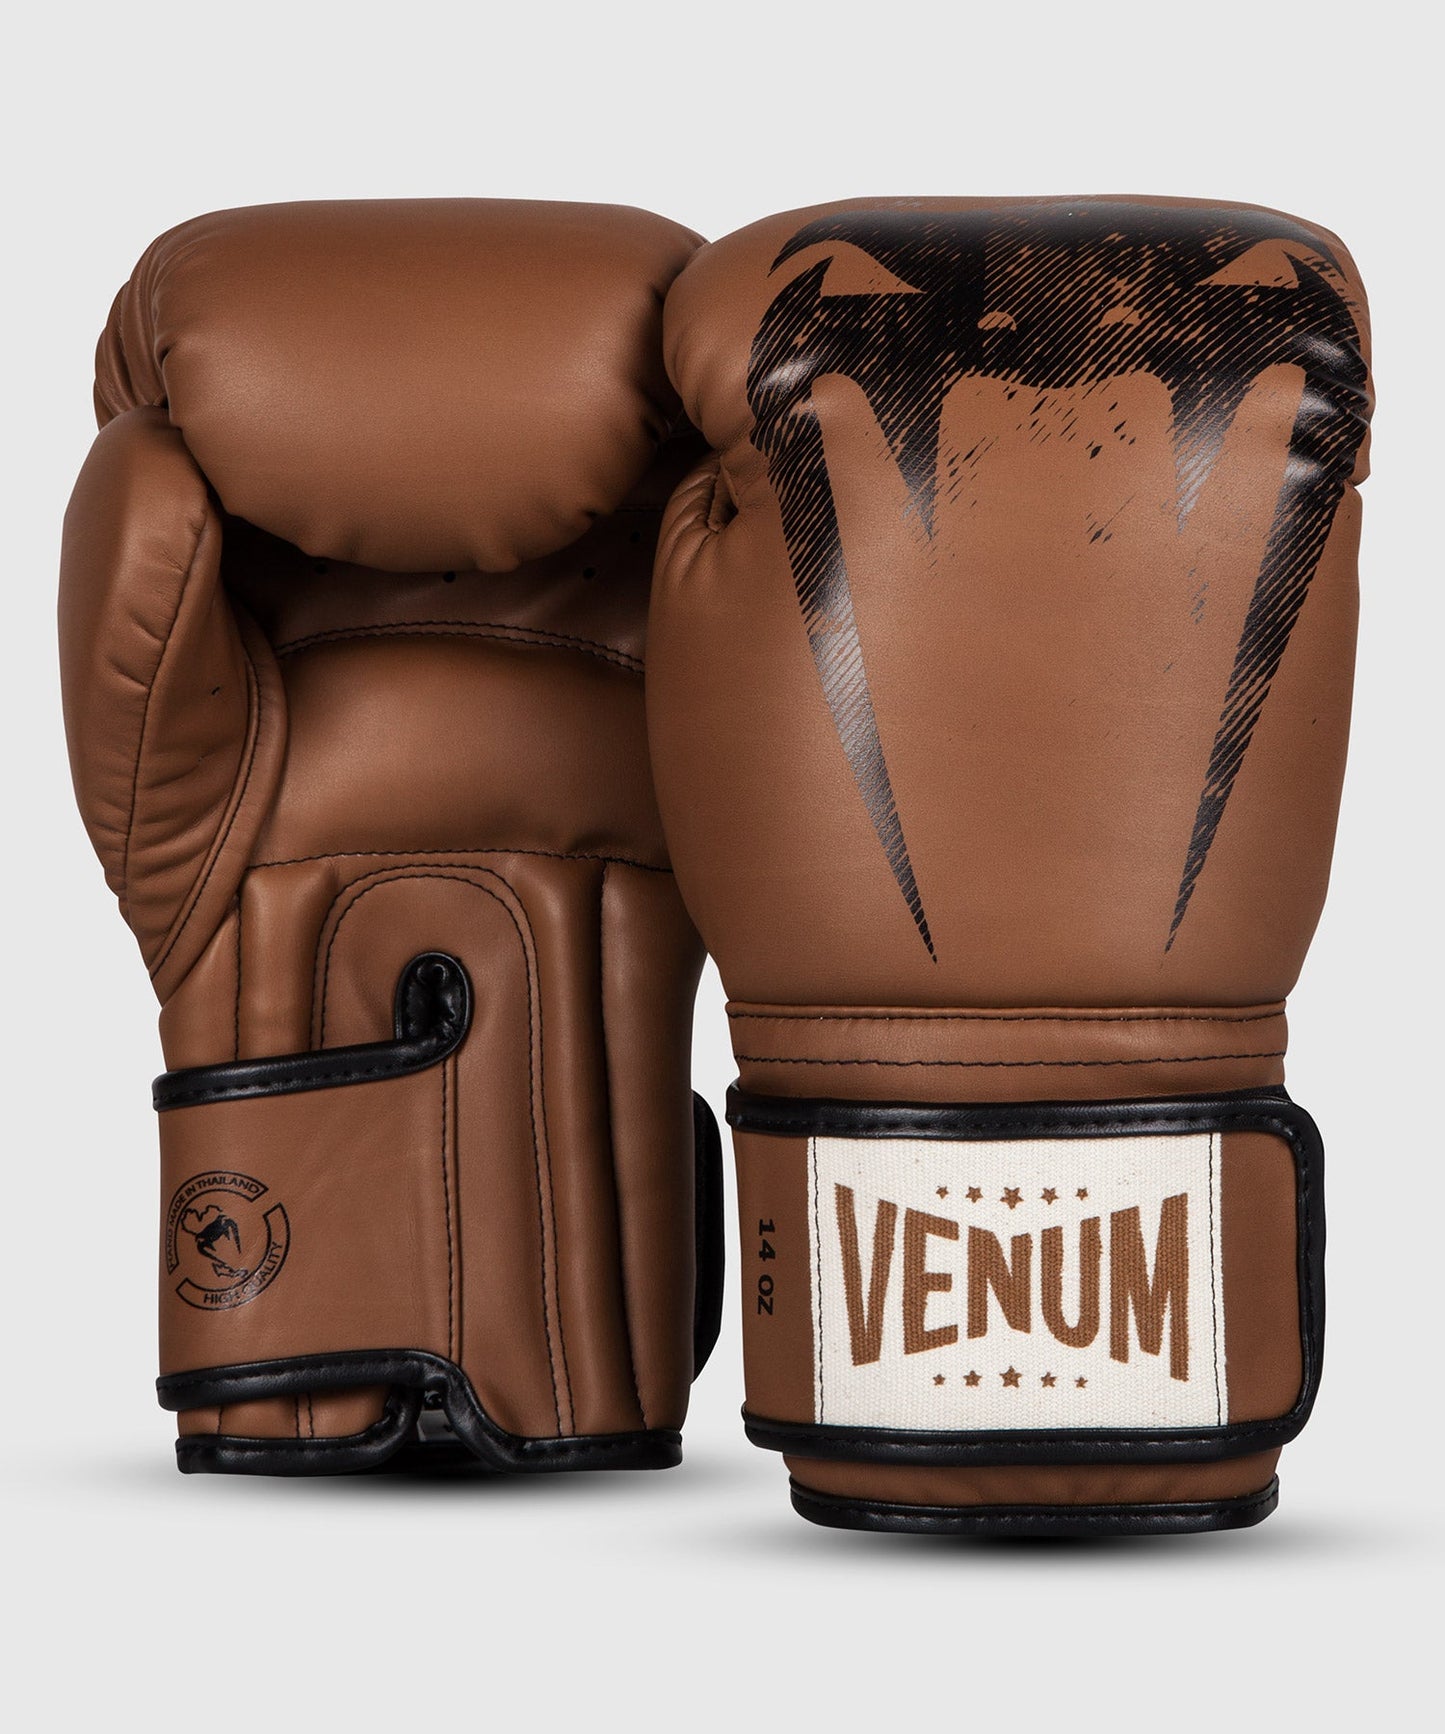 Venum Giant Sparring Boxing Gloves - Brown